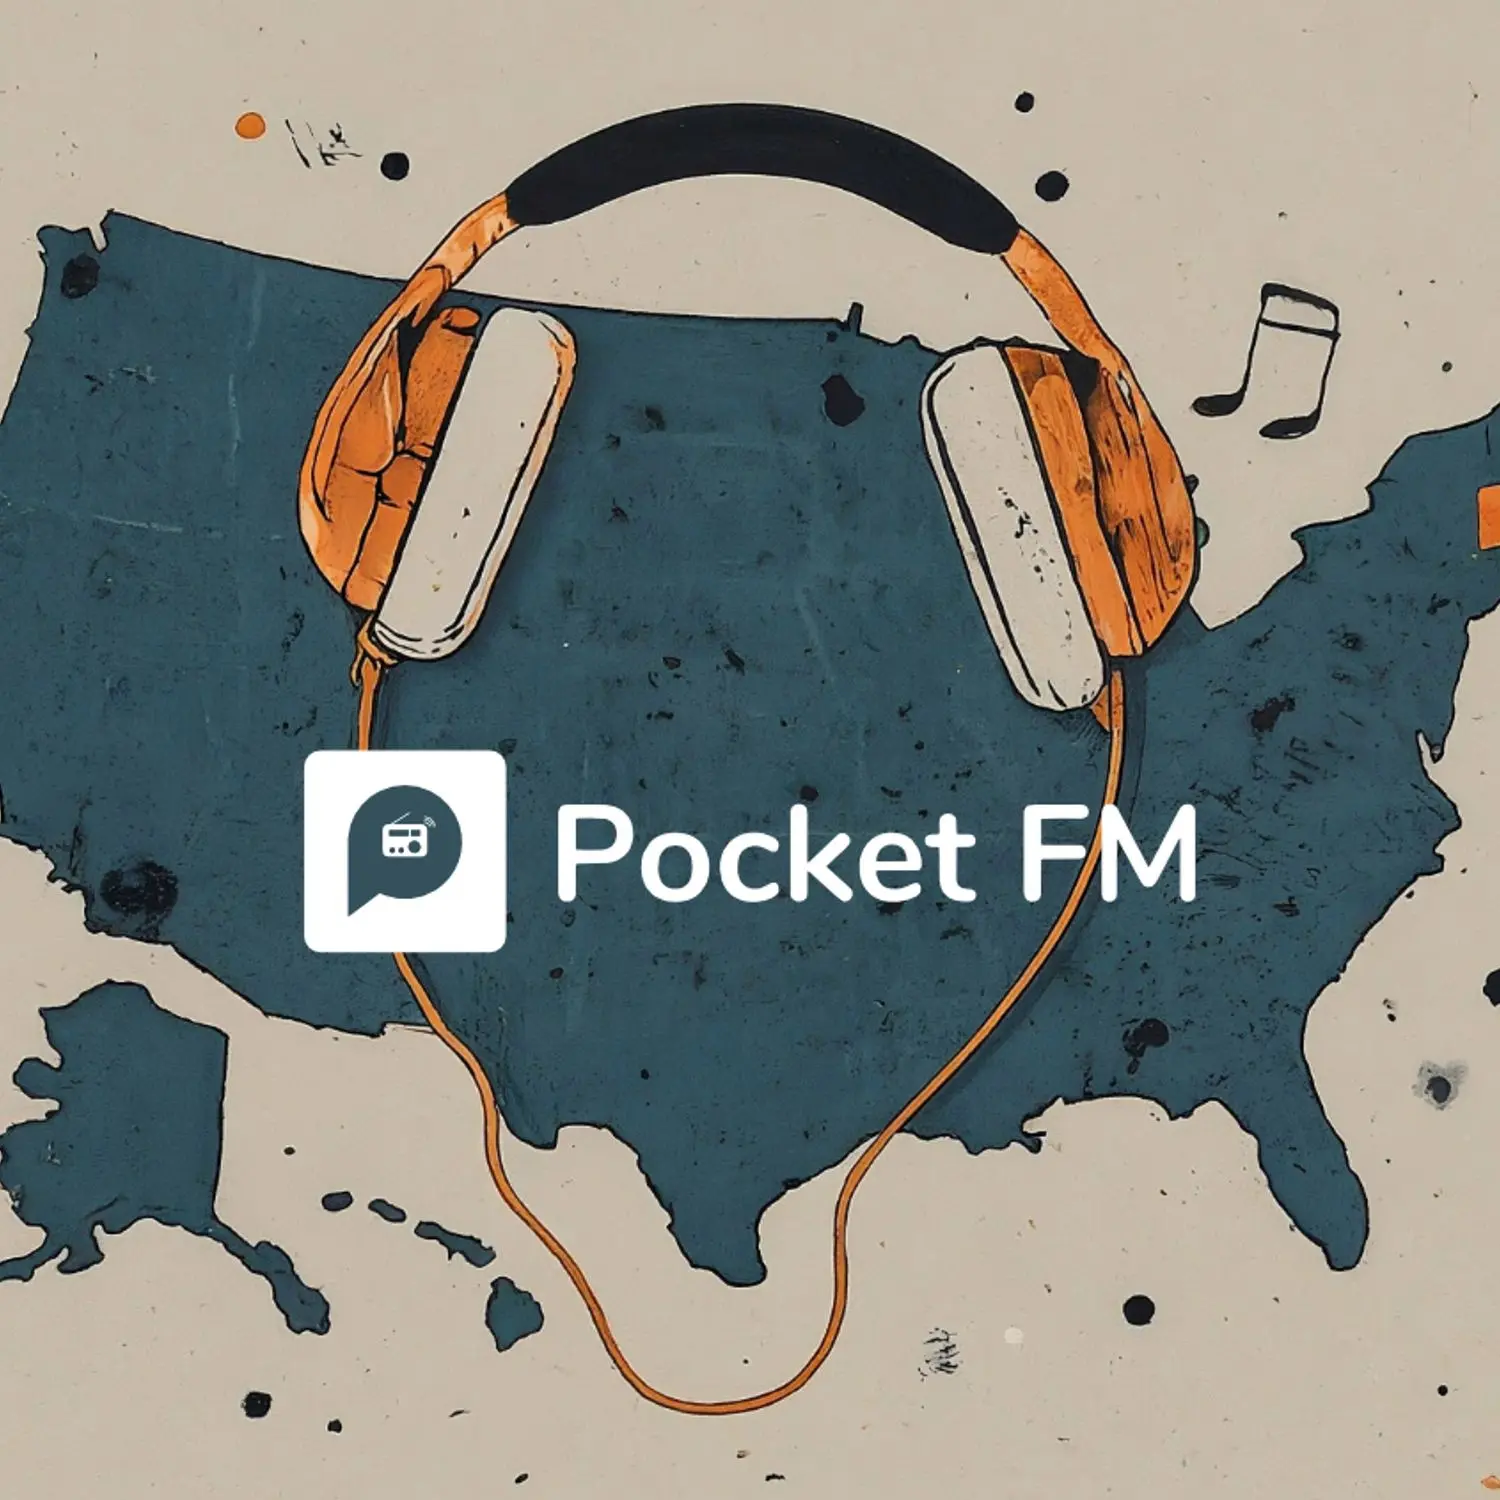 How Pocket FM won over Middle America to hit $160 Mn in ARR